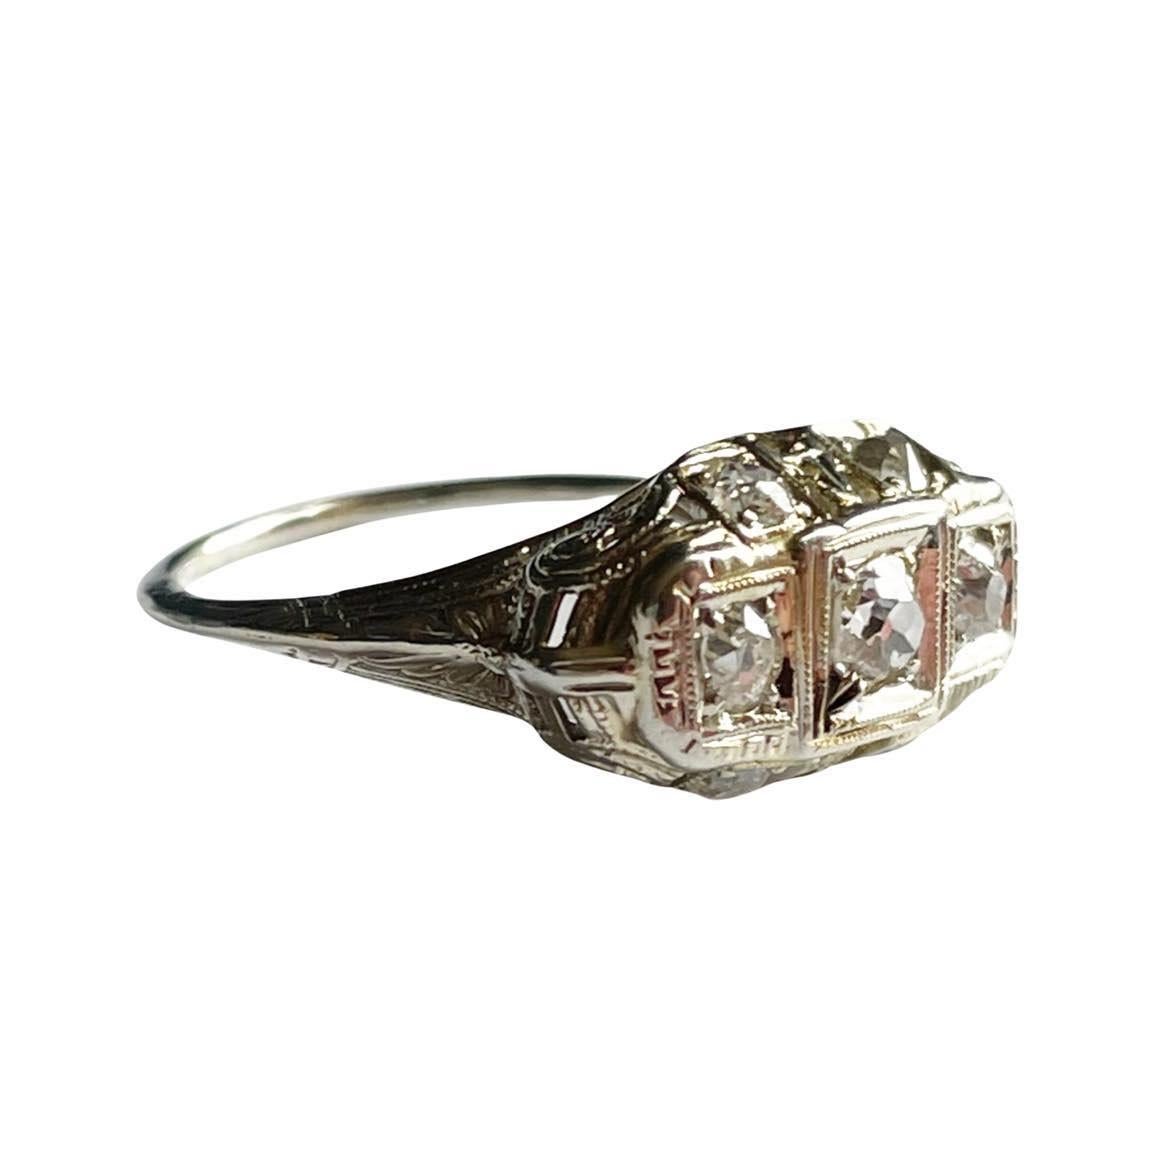 This Art Deco beauty is crafted in 18K white gold, the cathedral shanks are elegantly engraved with swirling geometric designs. Adding to the gallery, on either side are two old mine cut diamonds. Giving a unbelievable luster all the way around the